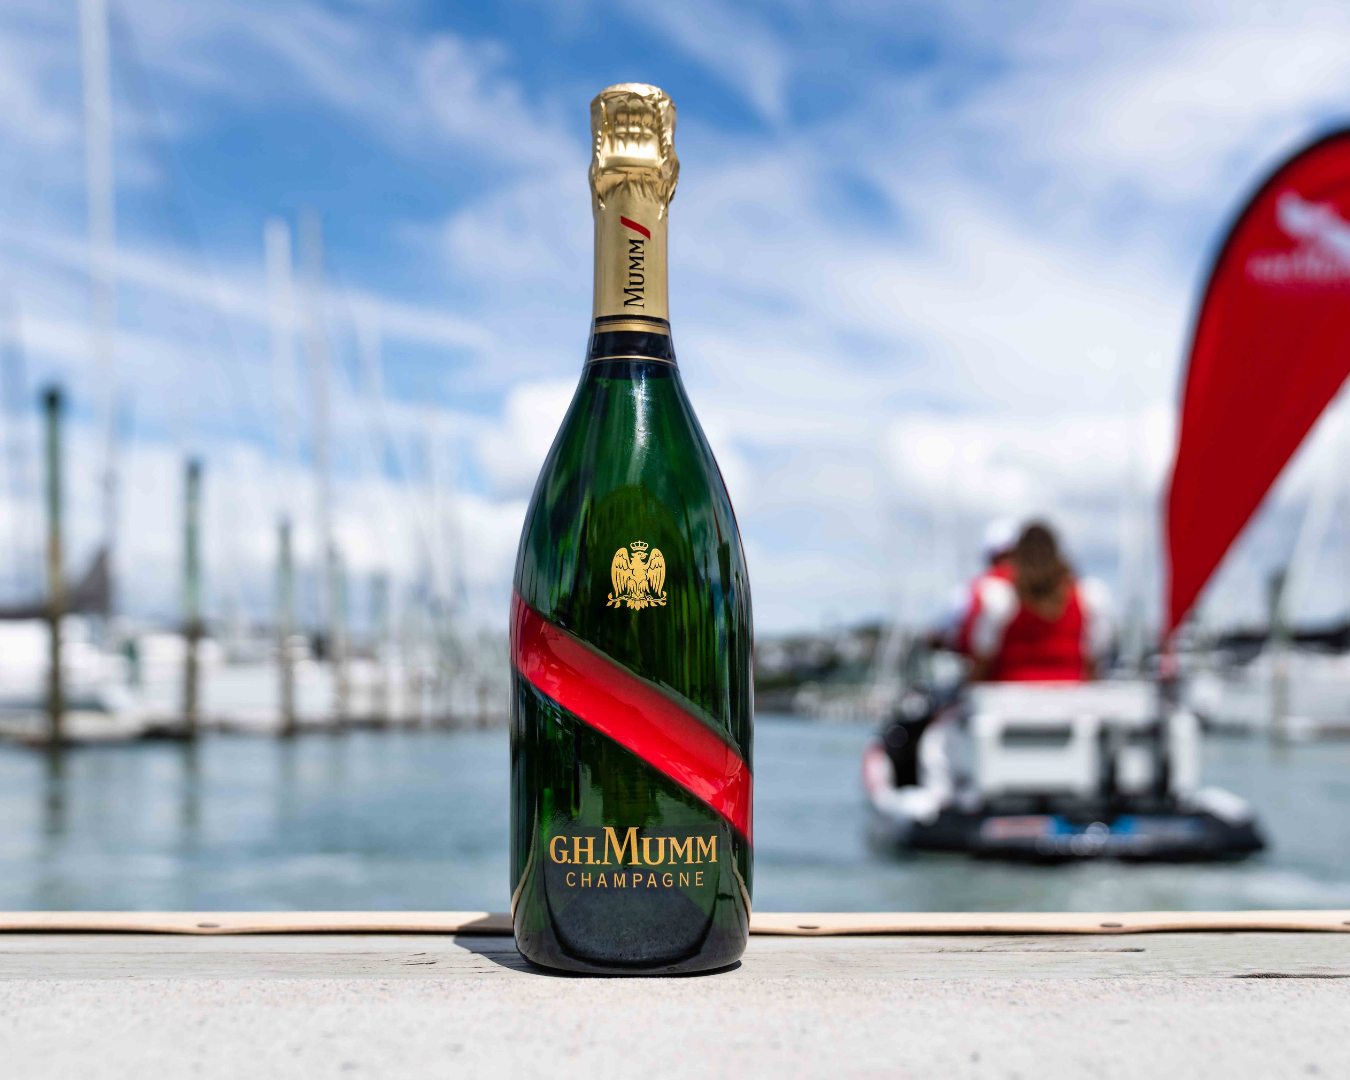 Bottle of G.H Mumm's champagne on the dock with the jet ski in the background